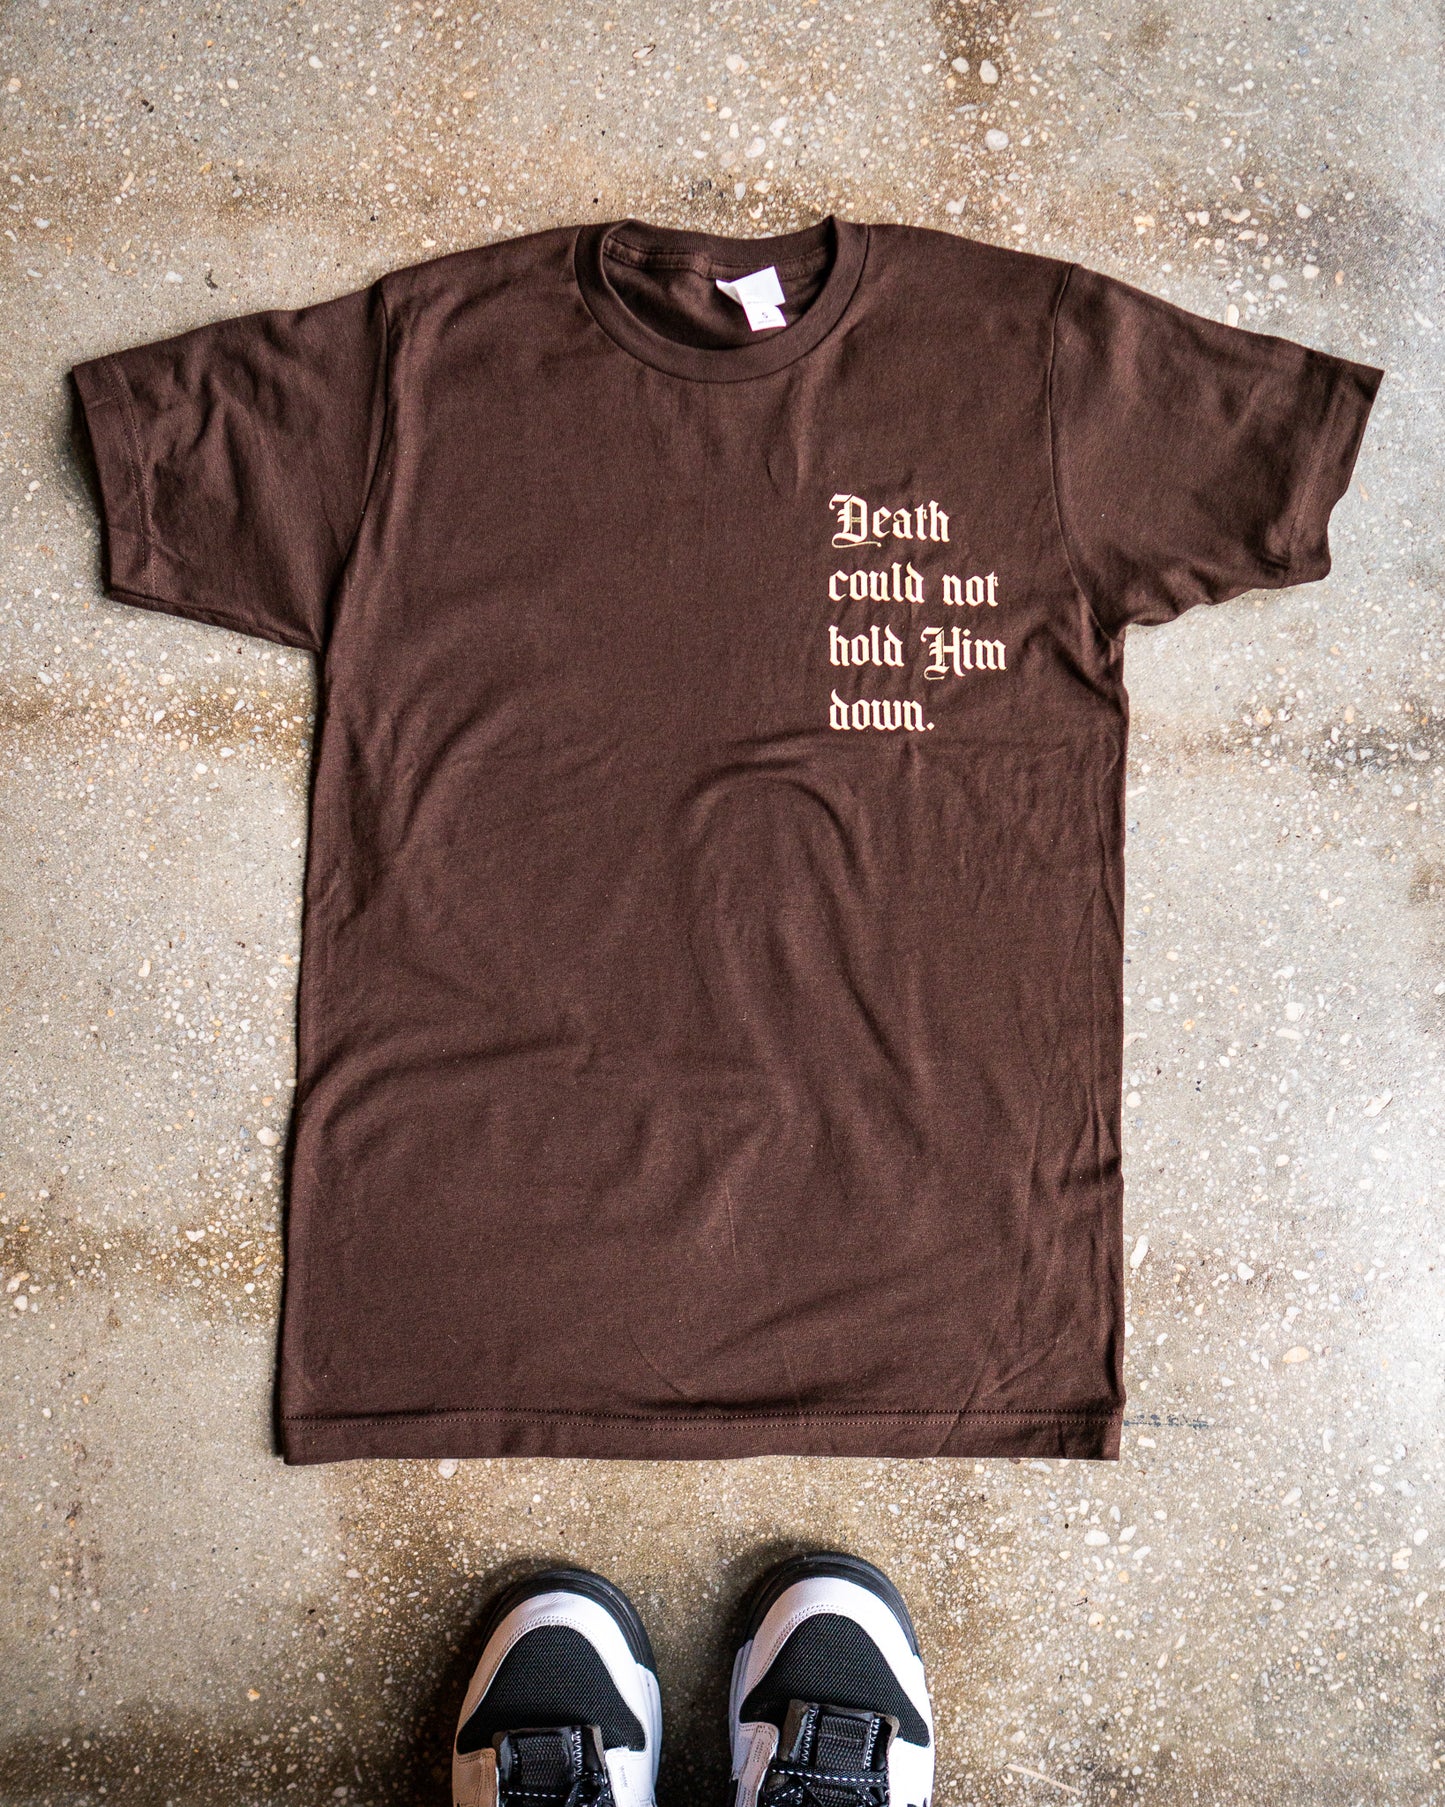 Death Couldn't Hold Him Adult Box T-Shirt